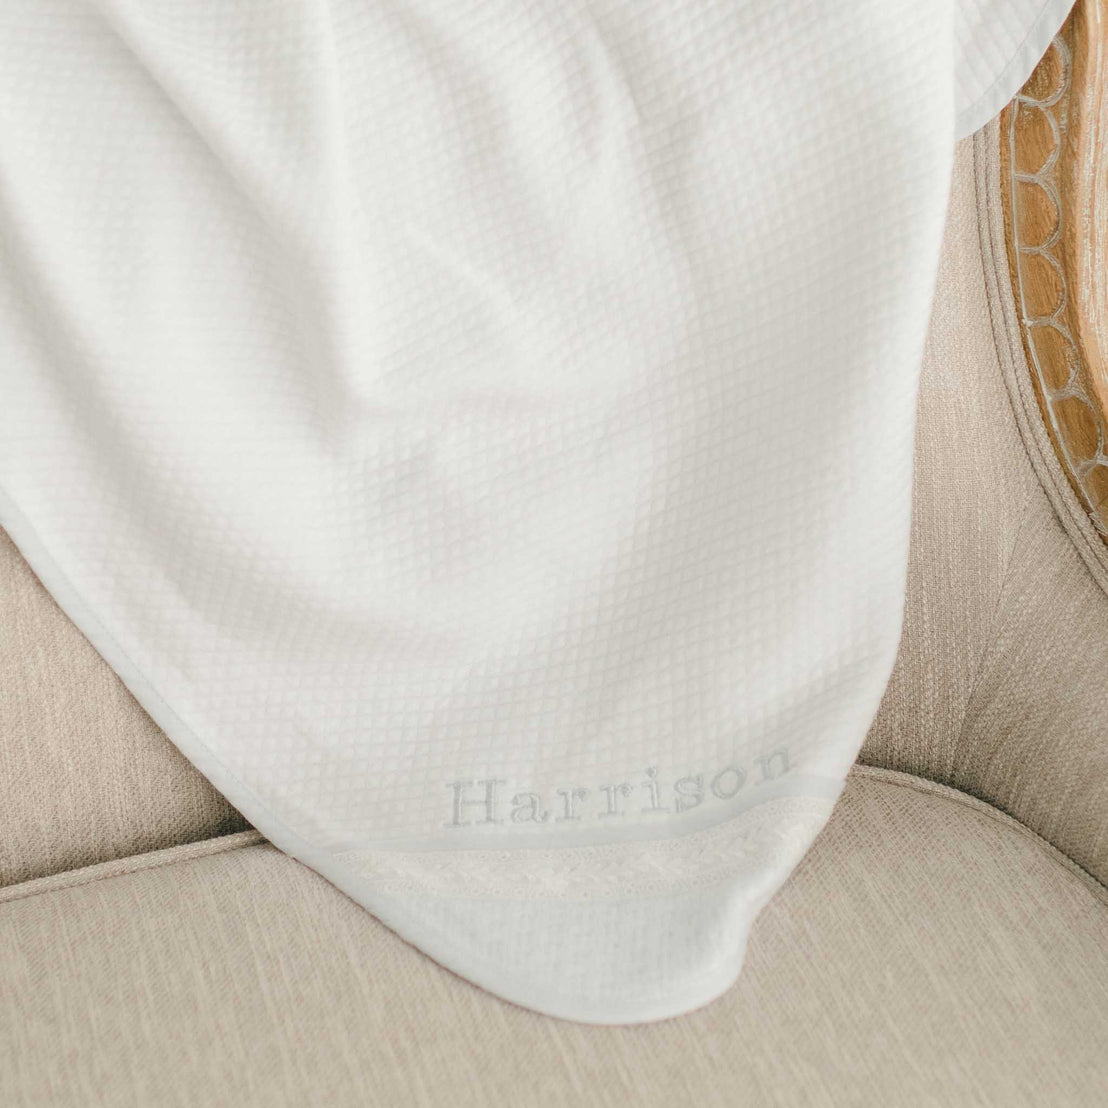 Flat lay photo the Harrison Personalized Blanket made with a plush quilted white cotton and trimmed with light blue linen. The accent corner features ivory Venice lace. On the corner of the blanket is the name "Harrison" embroidered in light blue thread